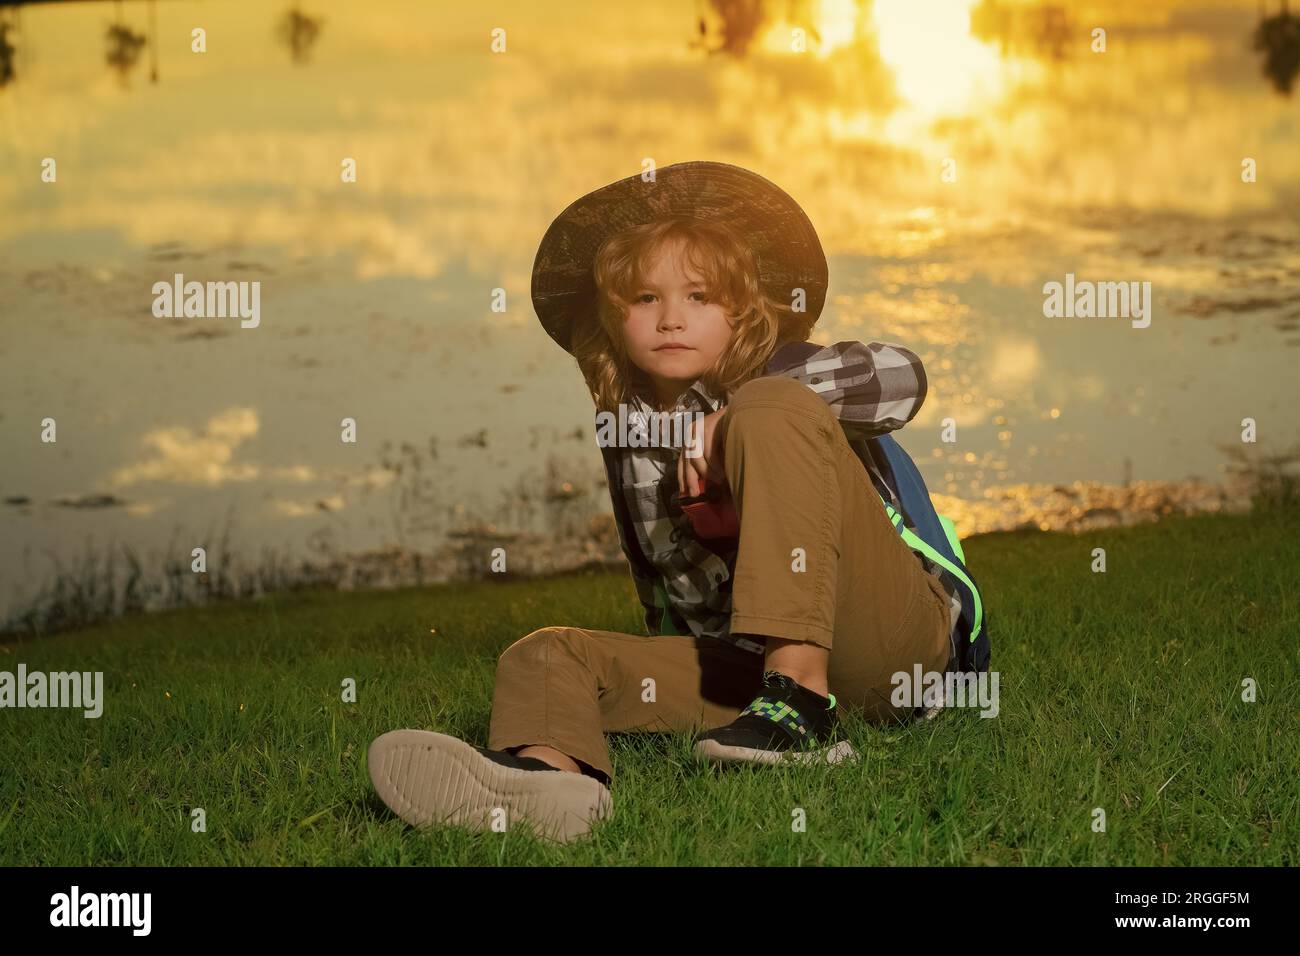 Kid with binoculars hiking at nature. Little explorer. Outdoor recreation and adventures with kids. Child tourist on sunny countryside background Stock Photo